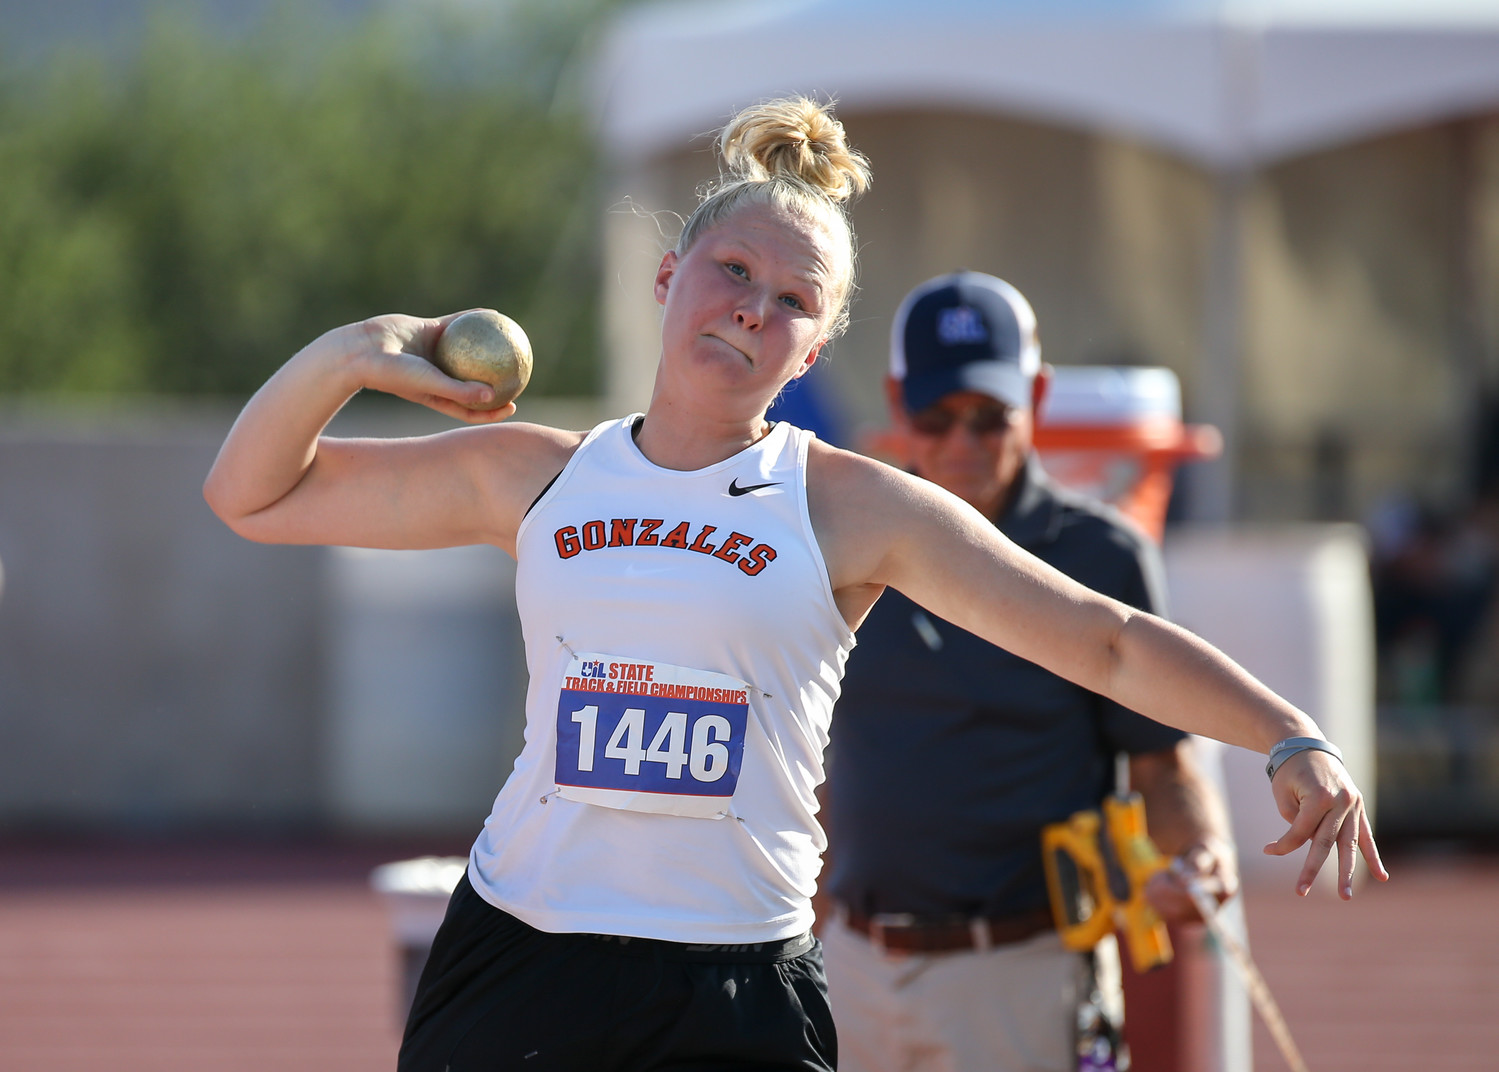 Devon Williams of Gonzales High School competes in the Class 4A girls shot put event at the UIL State Track and Field Meet at Mike A. Myers Stadium in Austin, Texas on Friday, May 11, 2018.